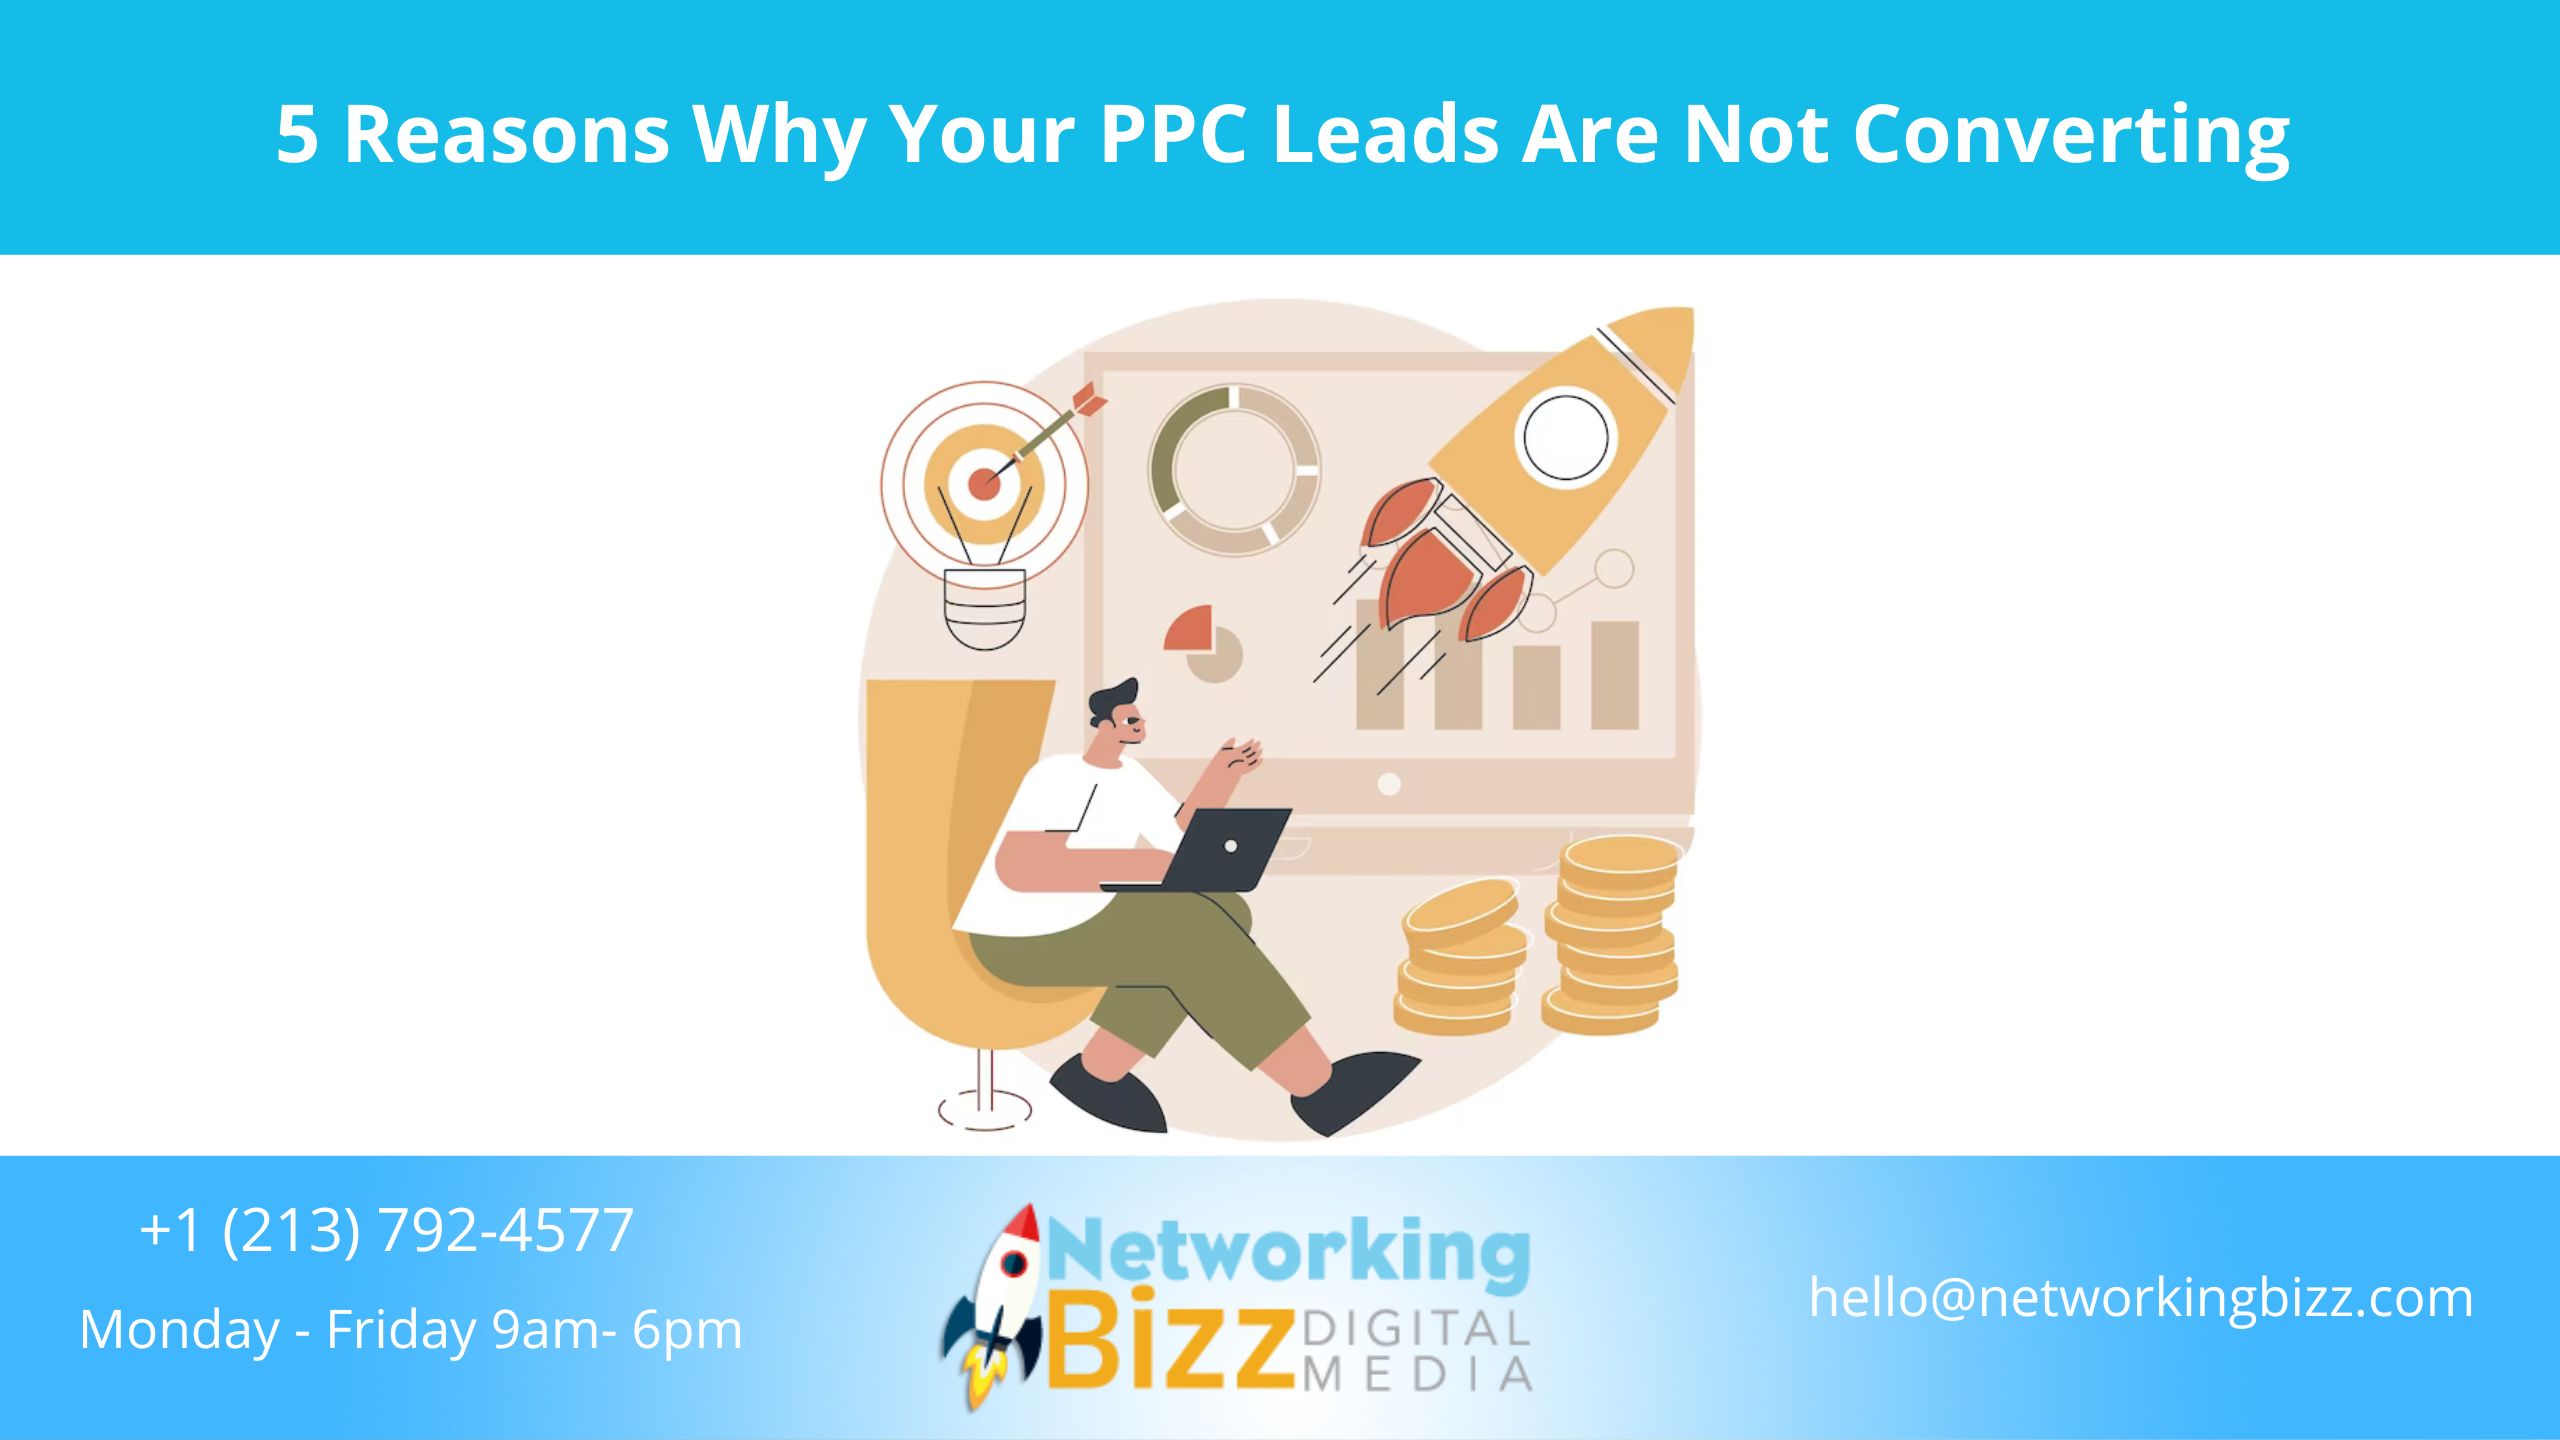 5 Reasons Why Your PPC Leads Are Not Converting